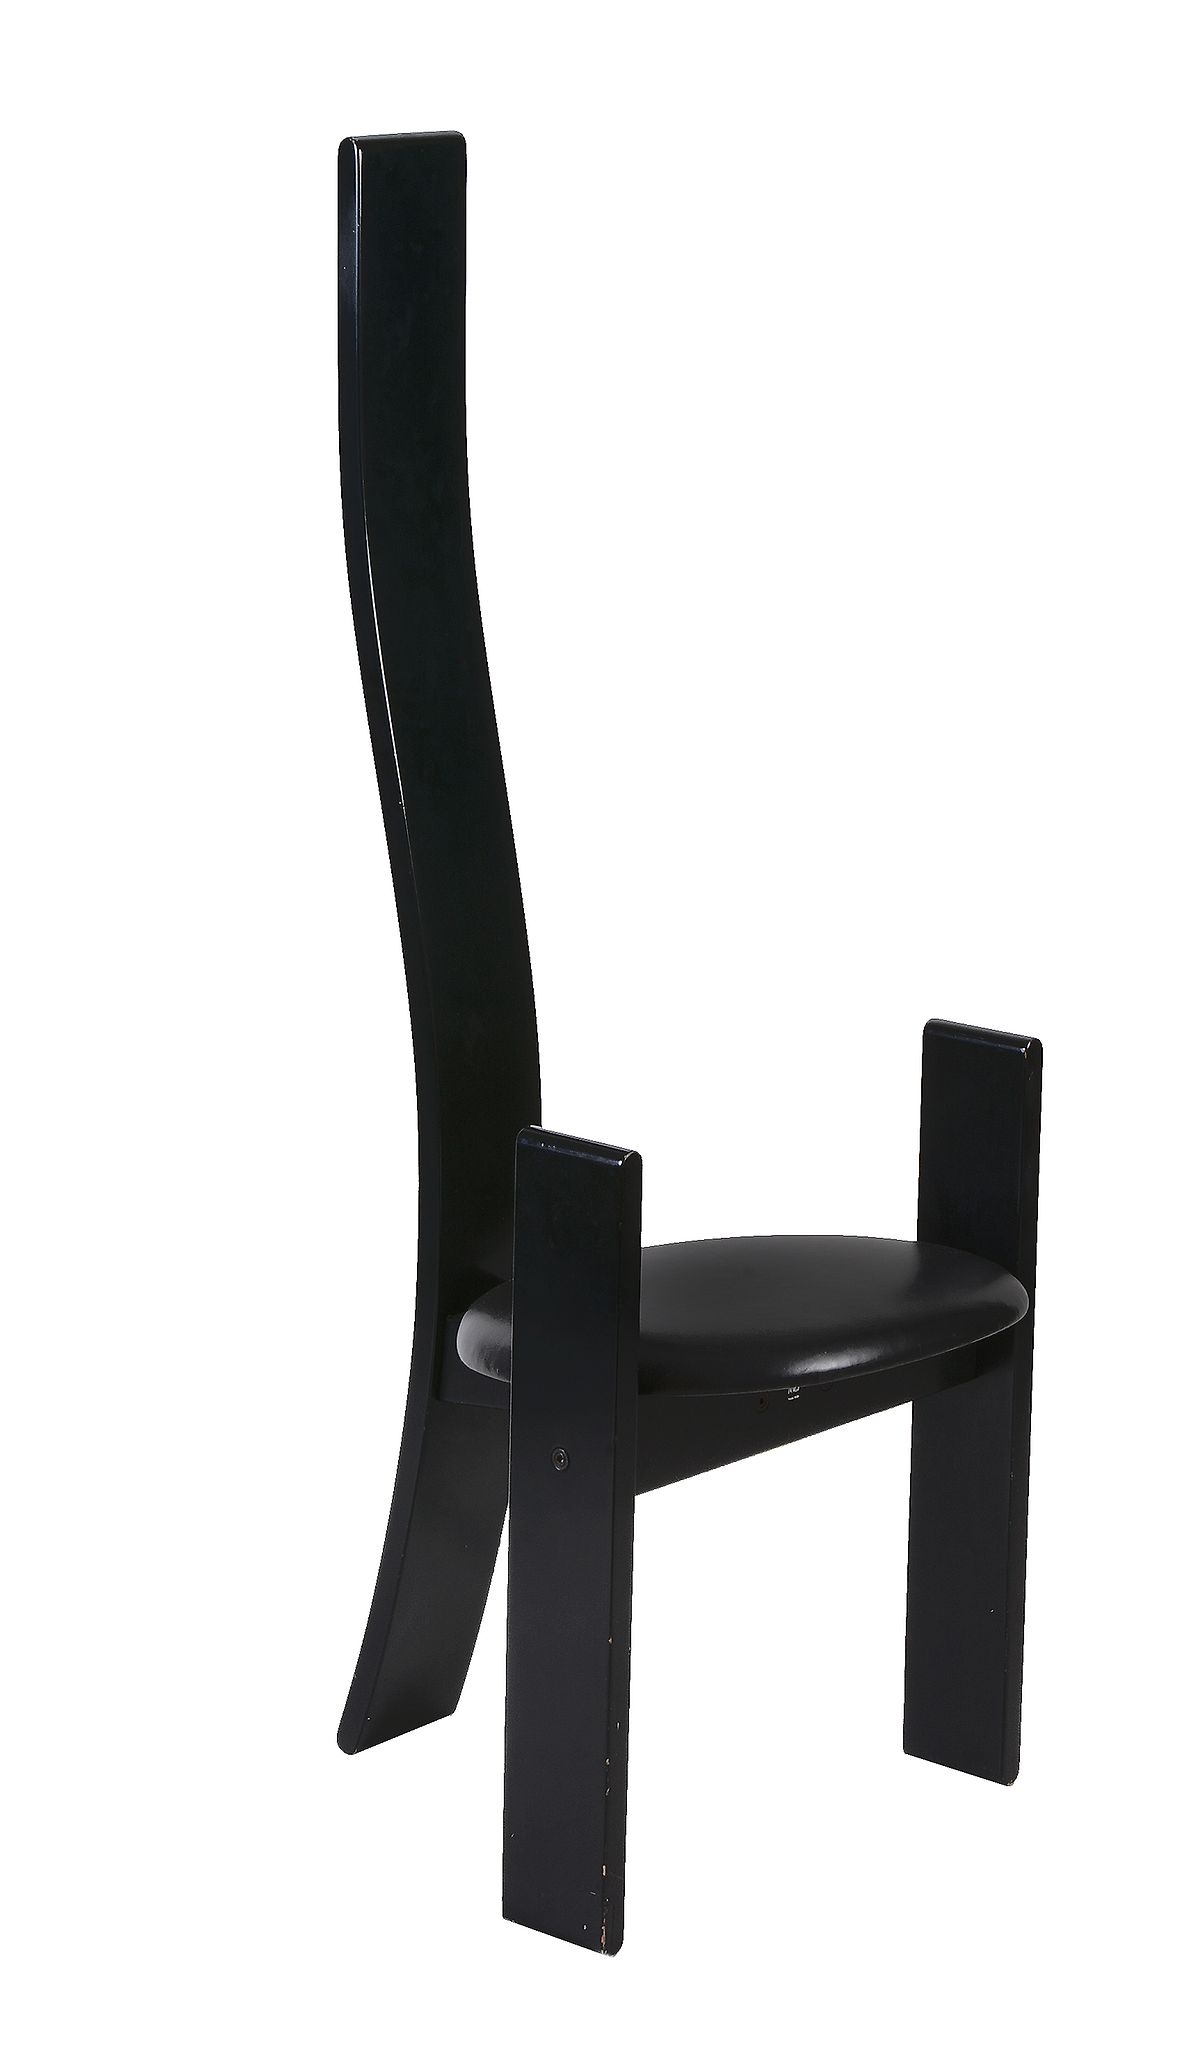 Vico Magistretti for Carlo Poggi, a black lacquered wooden Golem chair, with a black leather seat,